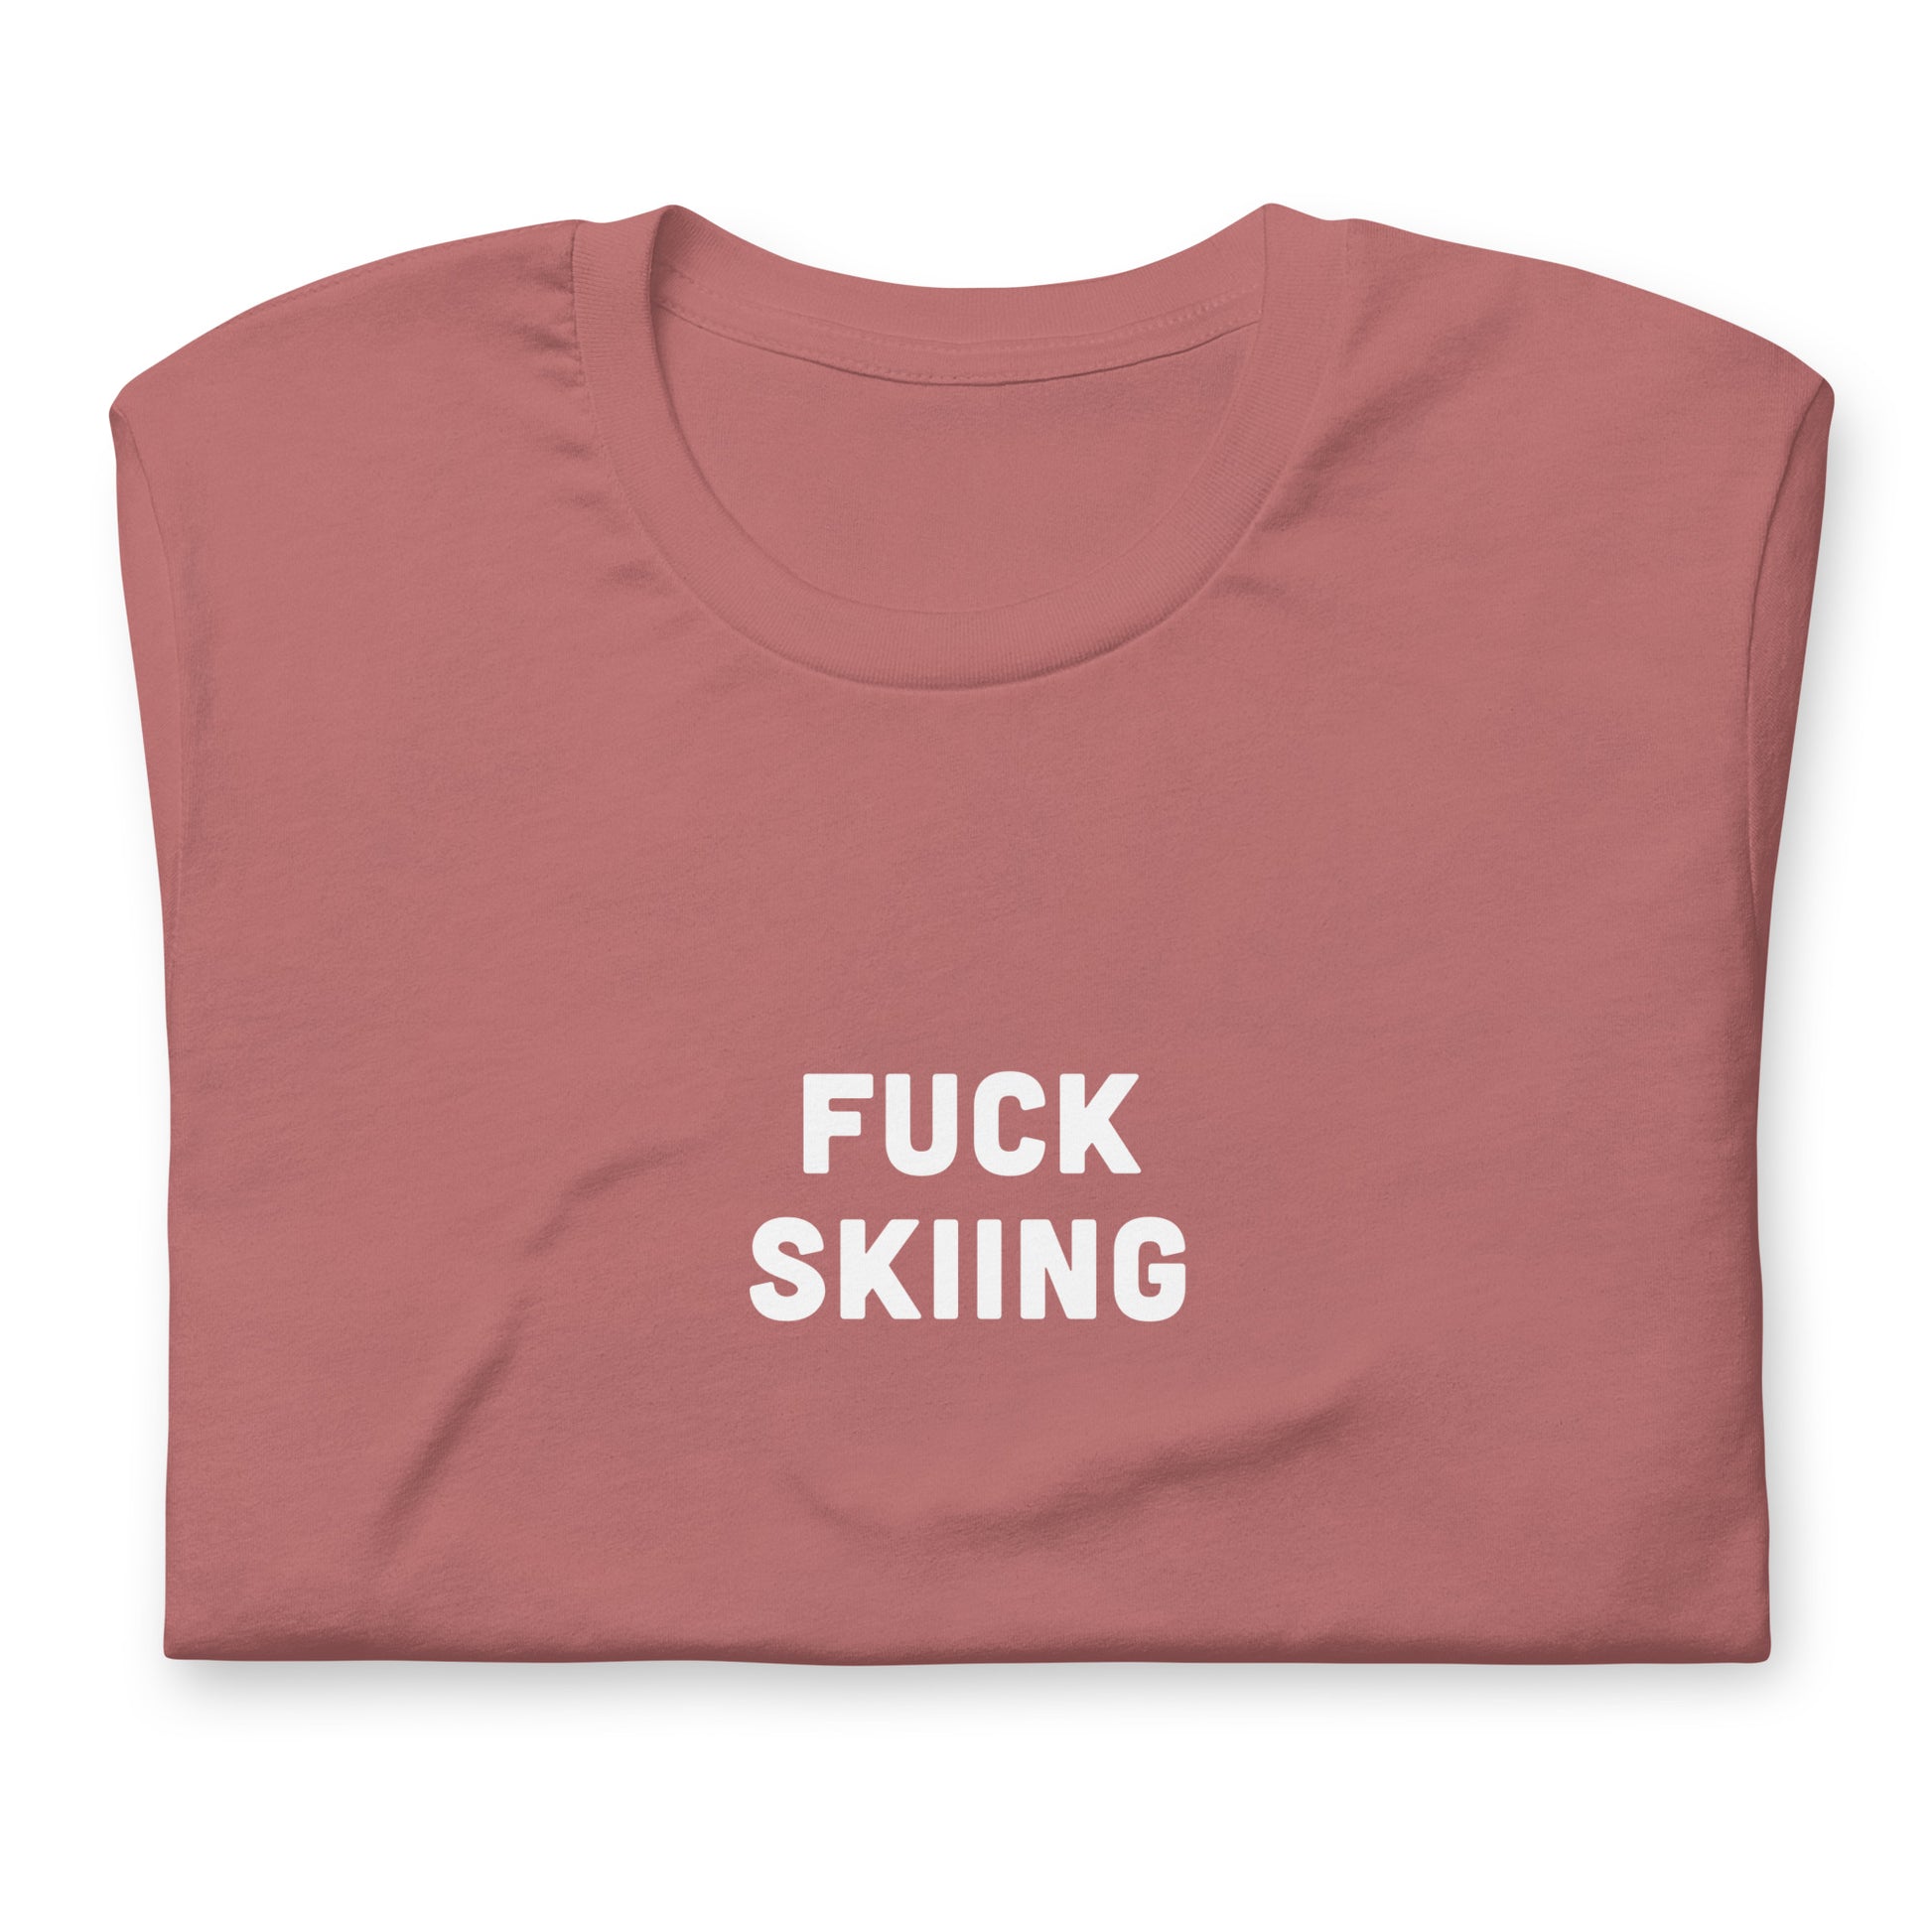 Fuck Skiing T-Shirt Size 2XL Color Navy